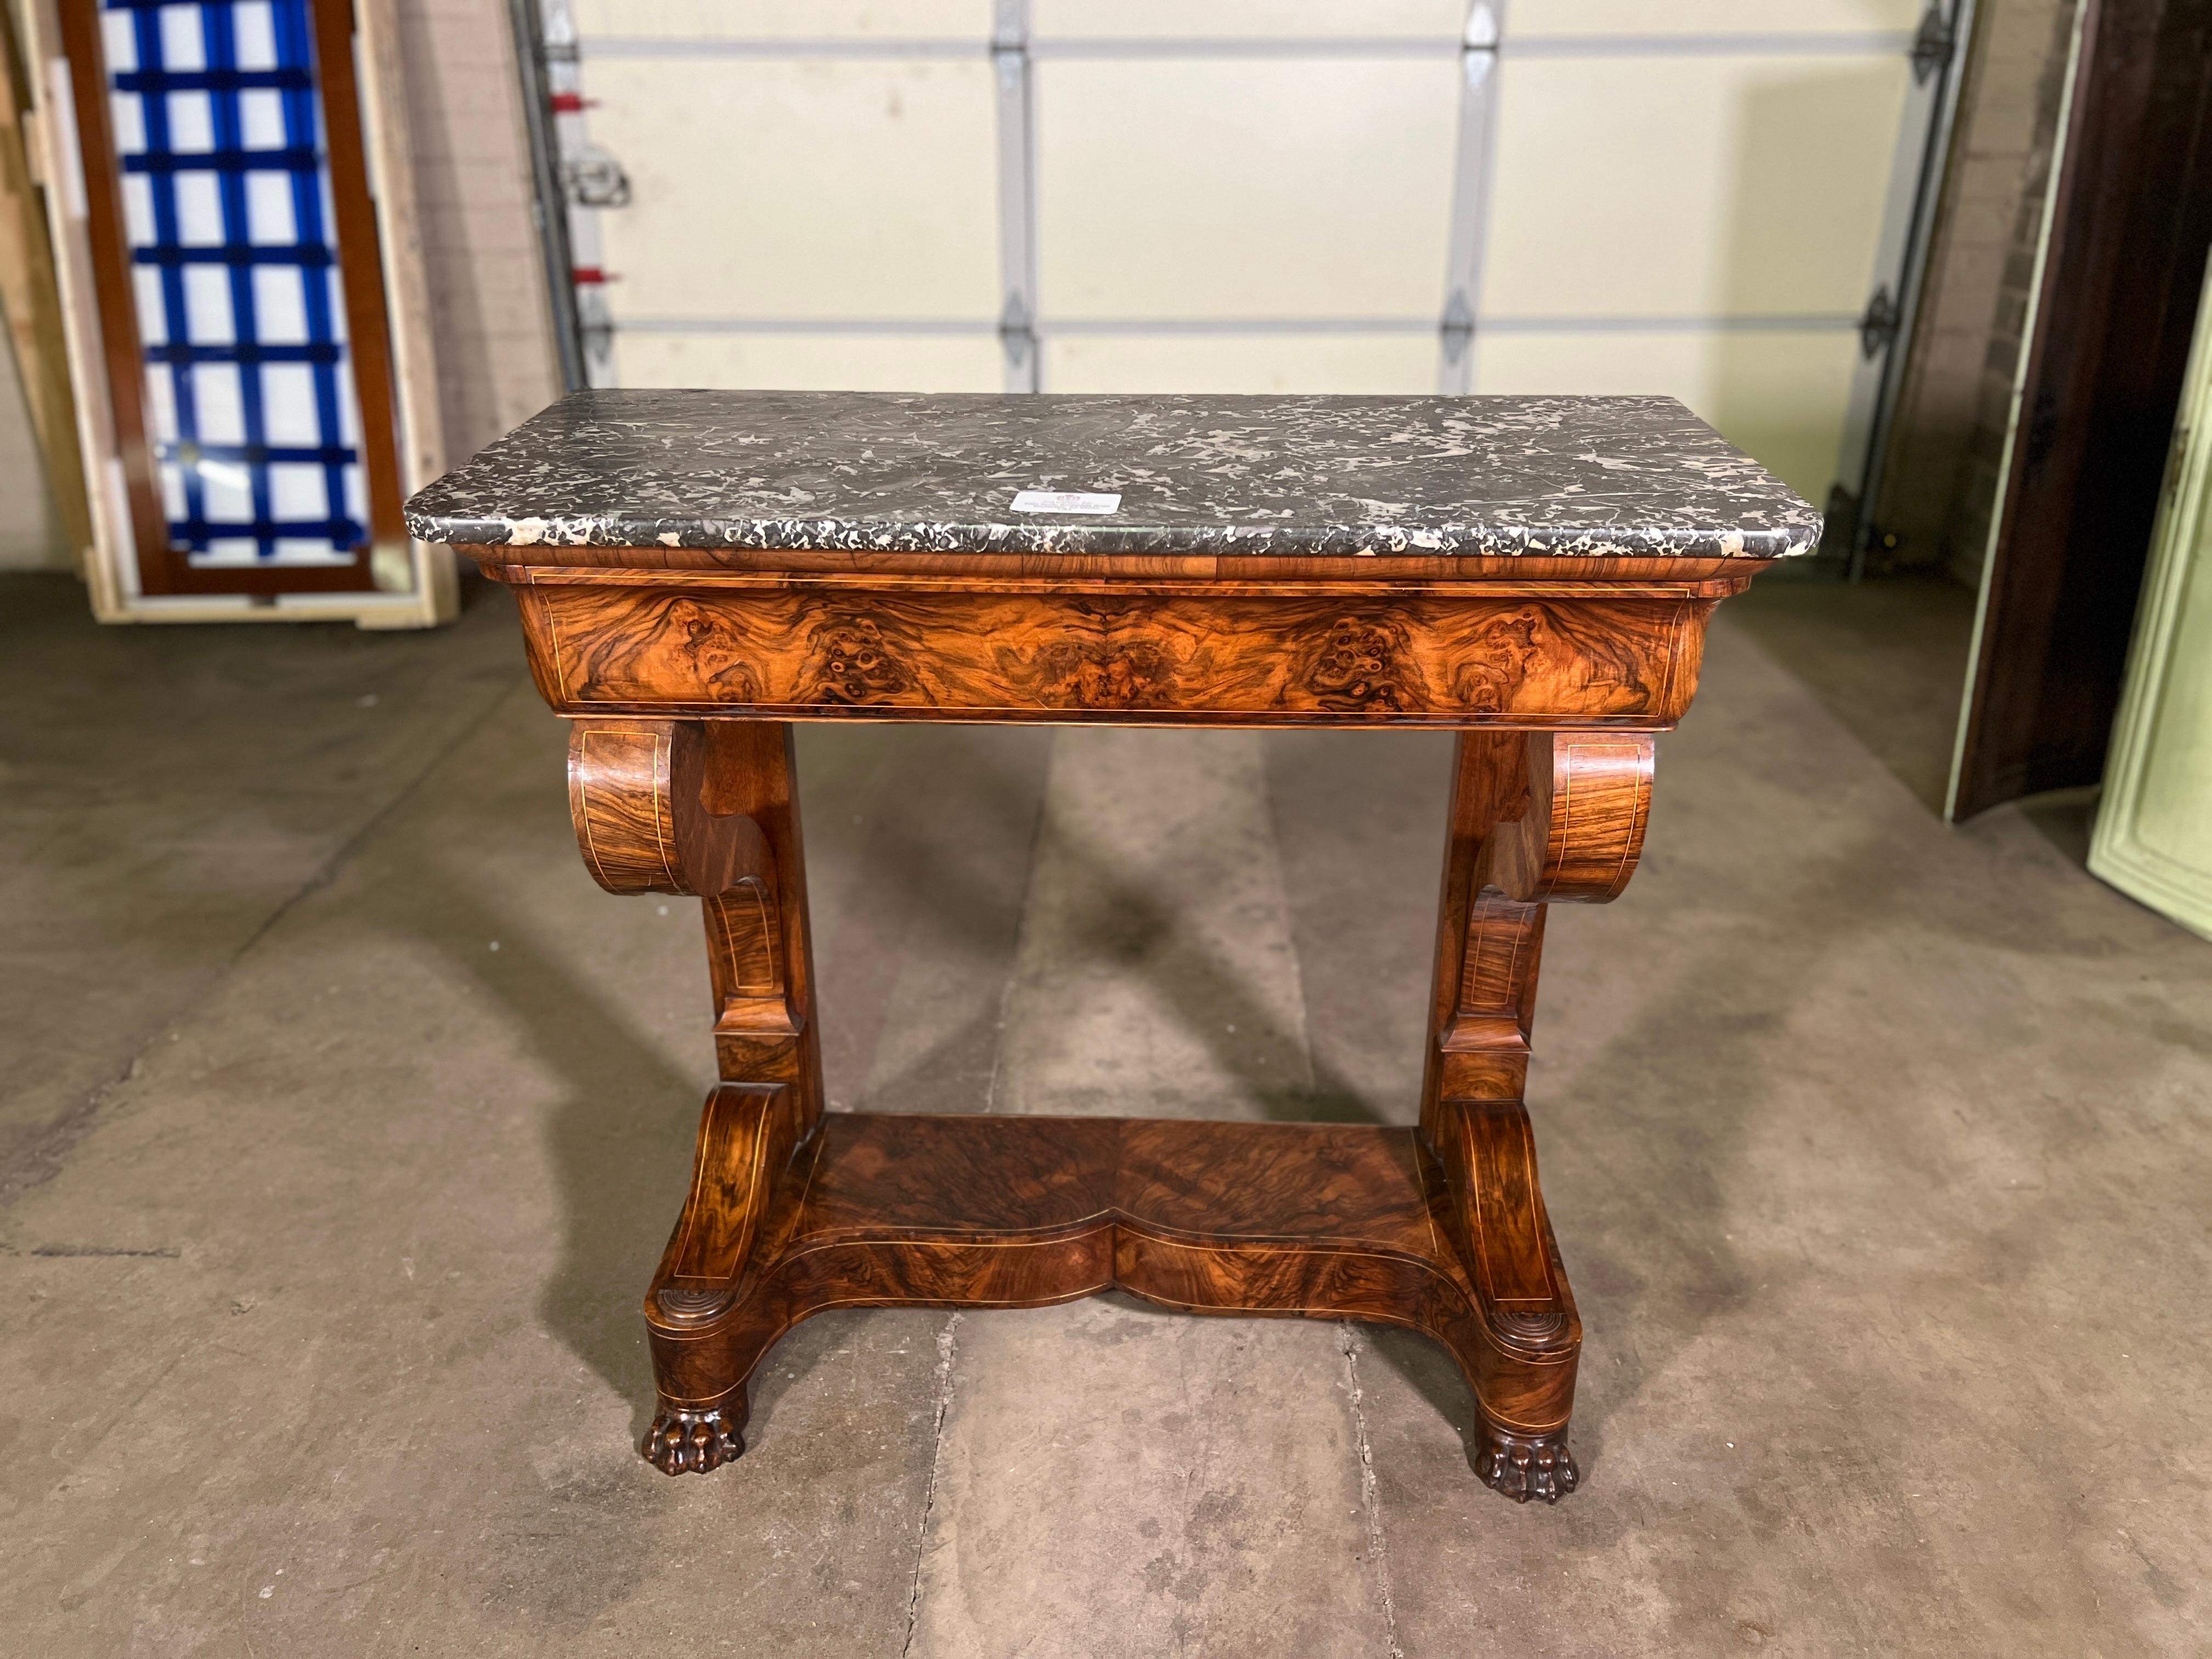 C1830 French Louis Philippe Mahogany Console with St. Anne Marble
Beautiful piece, see photos. 